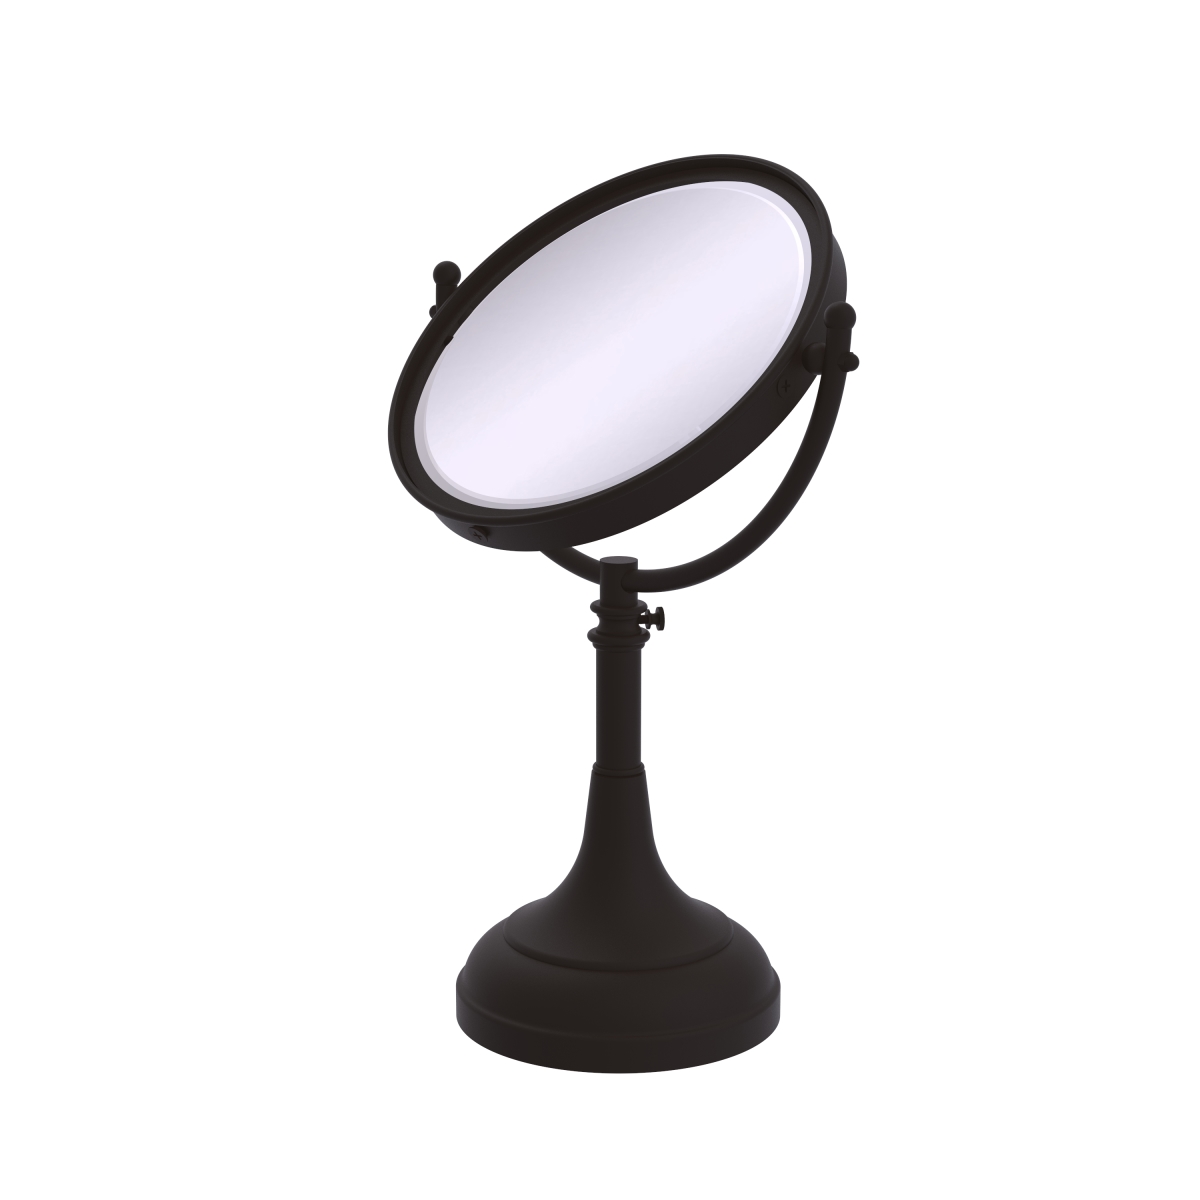 Dm-1-2x-orb Height Adjustable 8 In. Vanity Top Make-up Mirror 2x Magnification, Oil Rubbed Bronze